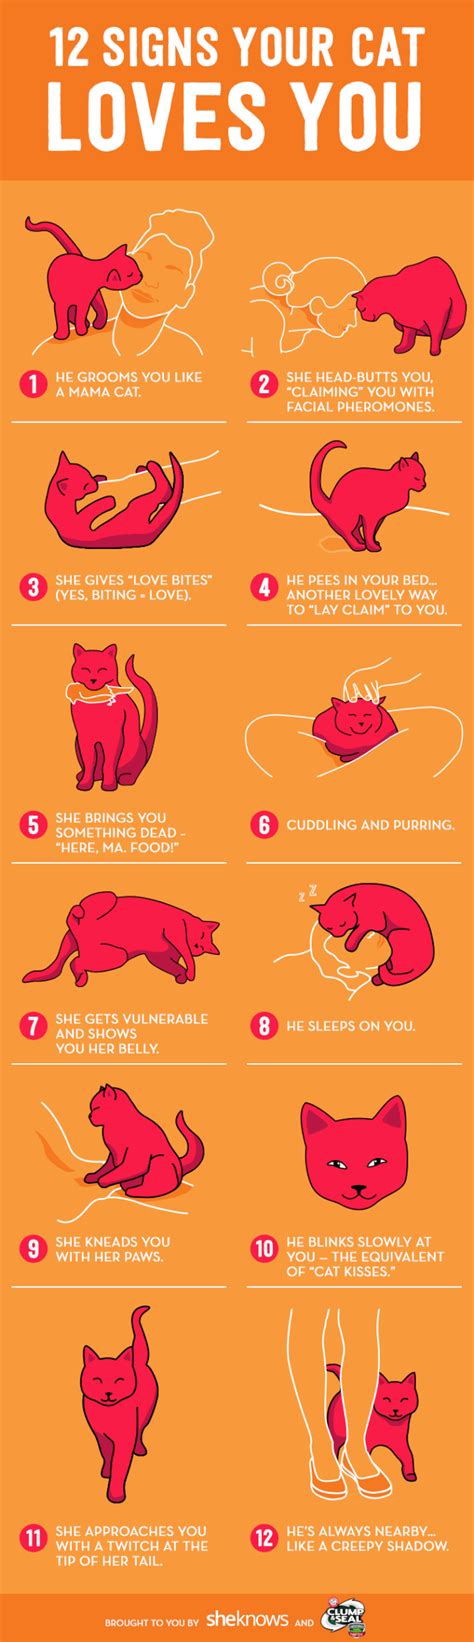 12 surprising (and sometimes creepy) signs your cat doesn't actually hate you Kitten Care, Cat ...